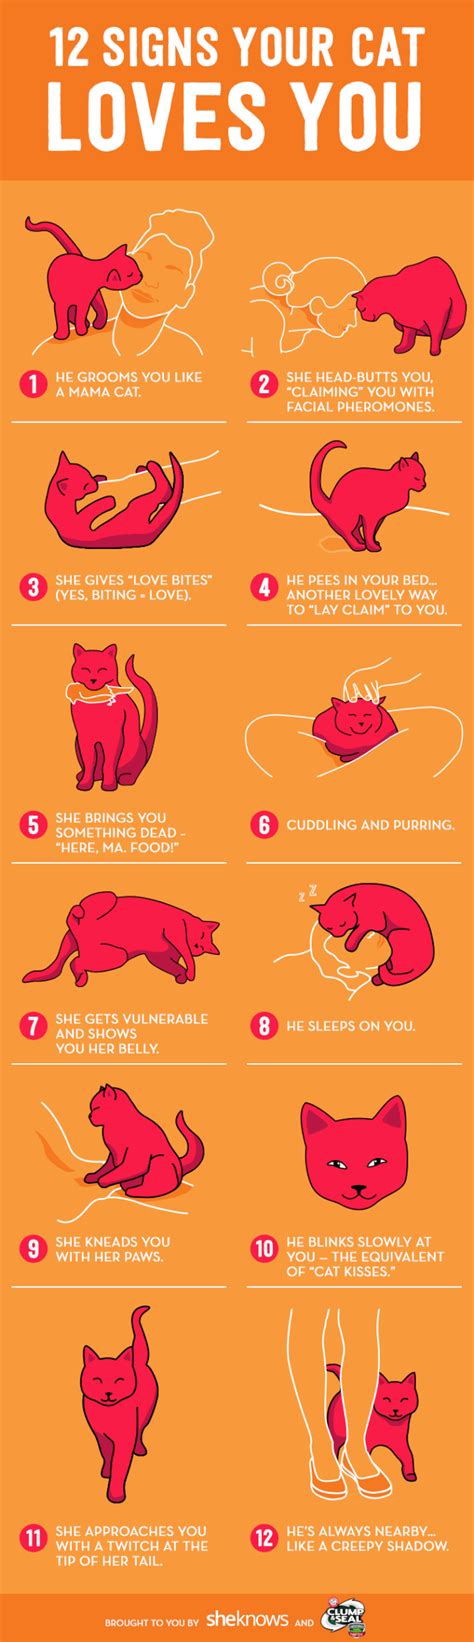 12 surprising (and sometimes creepy) signs your cat doesn't actually hate you Kitten Care, Cat ...